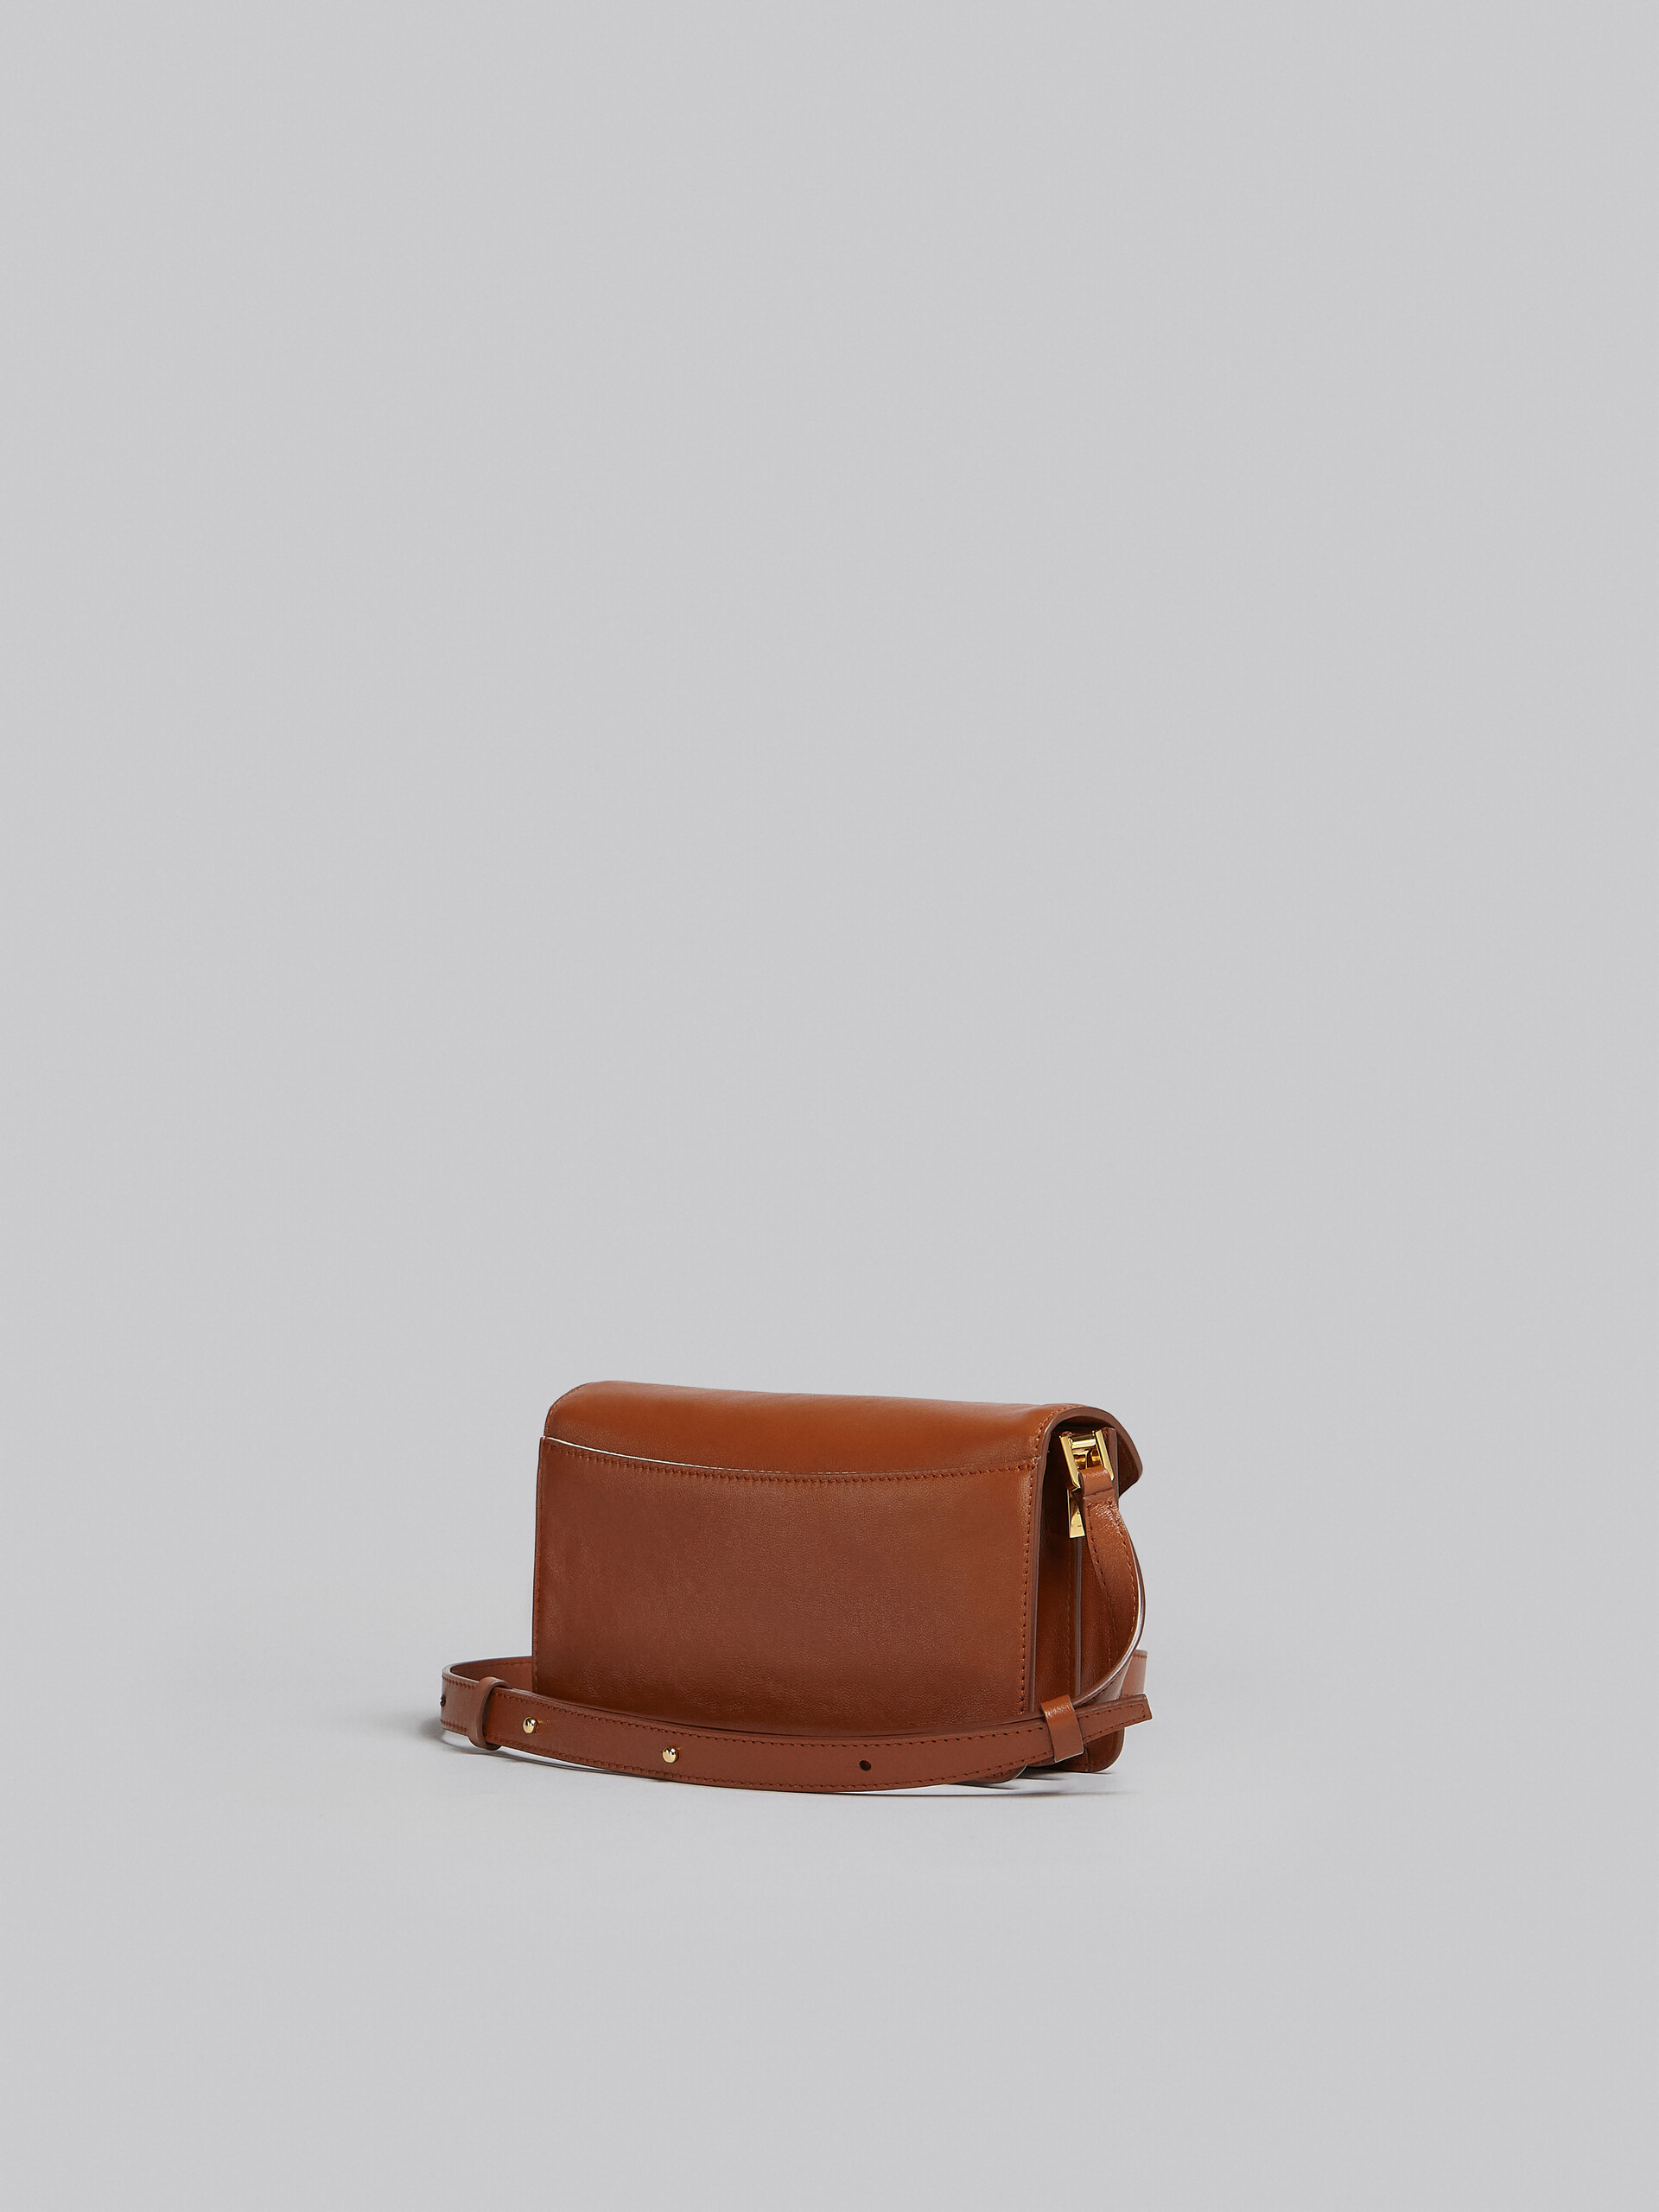 Trunk Soft Bag E/W in brown leather - Shoulder Bags - Image 2